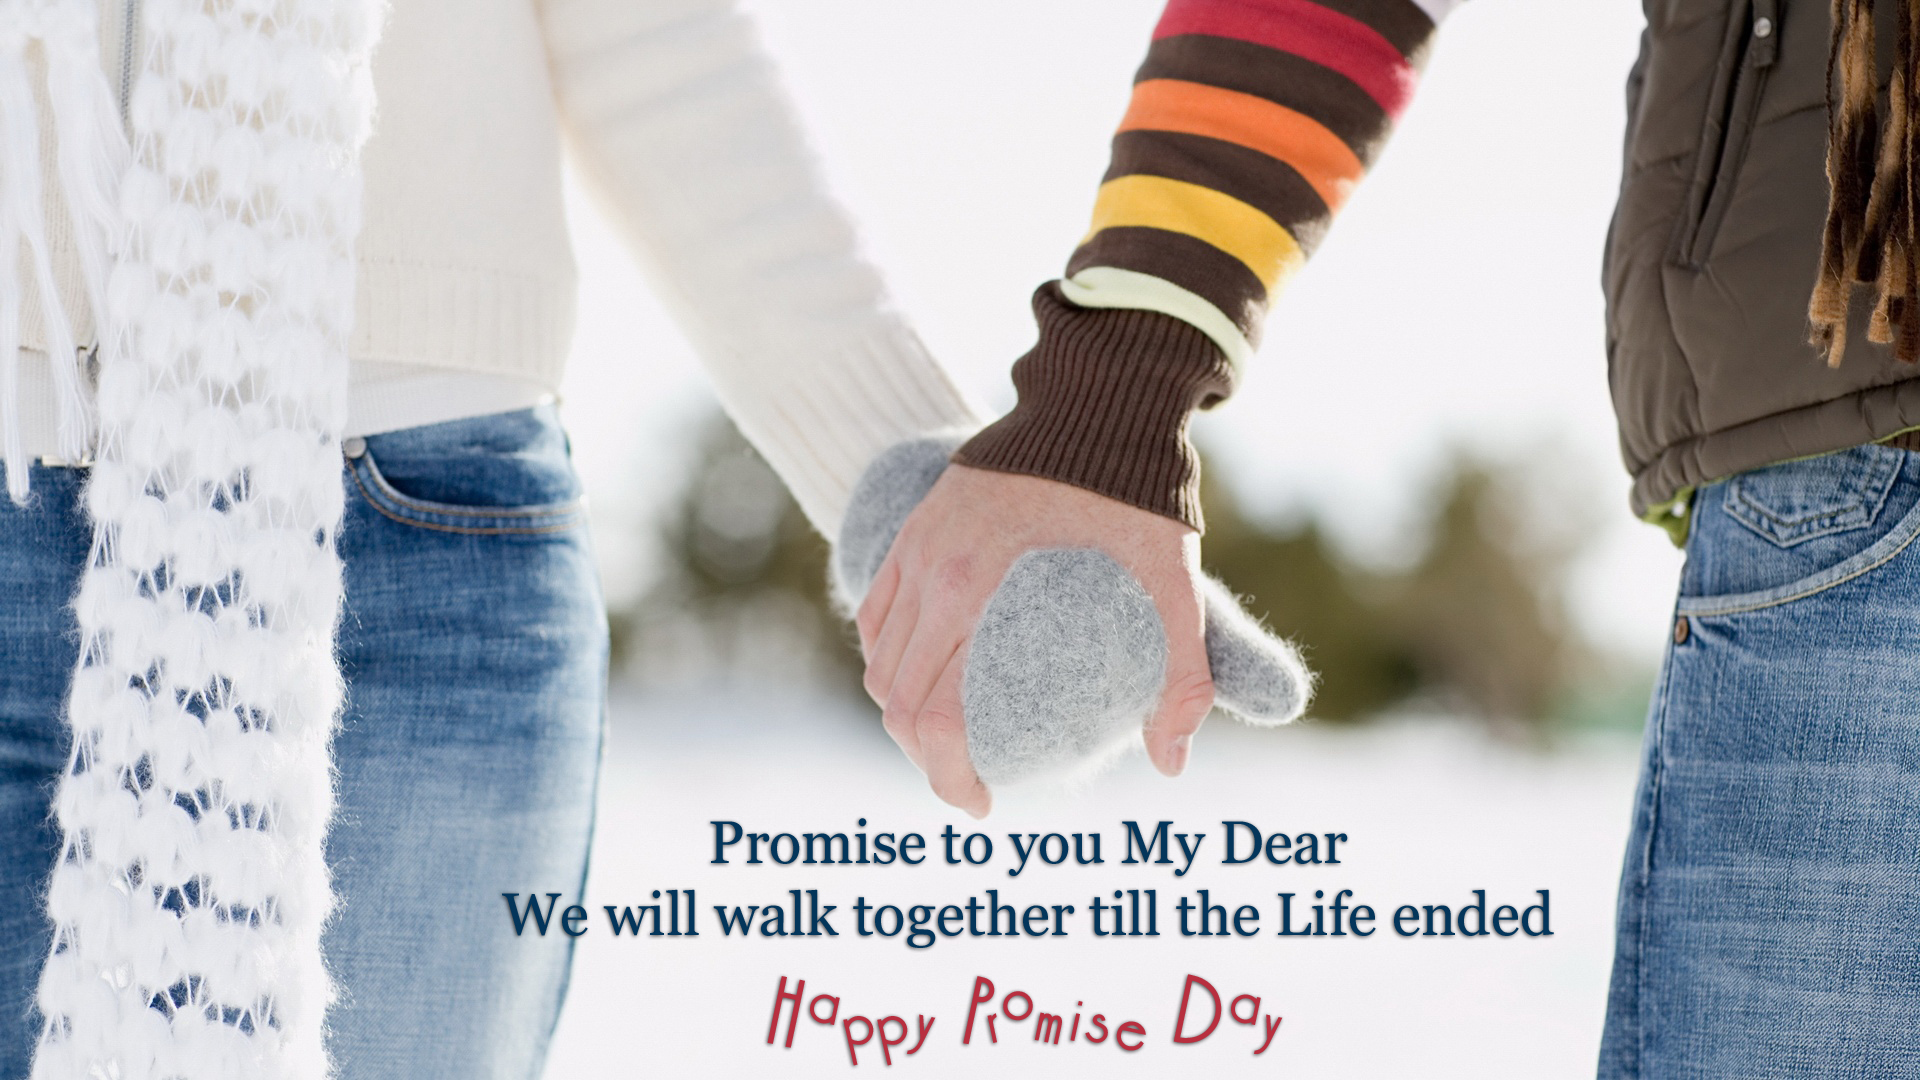 happy promise day wishes images 